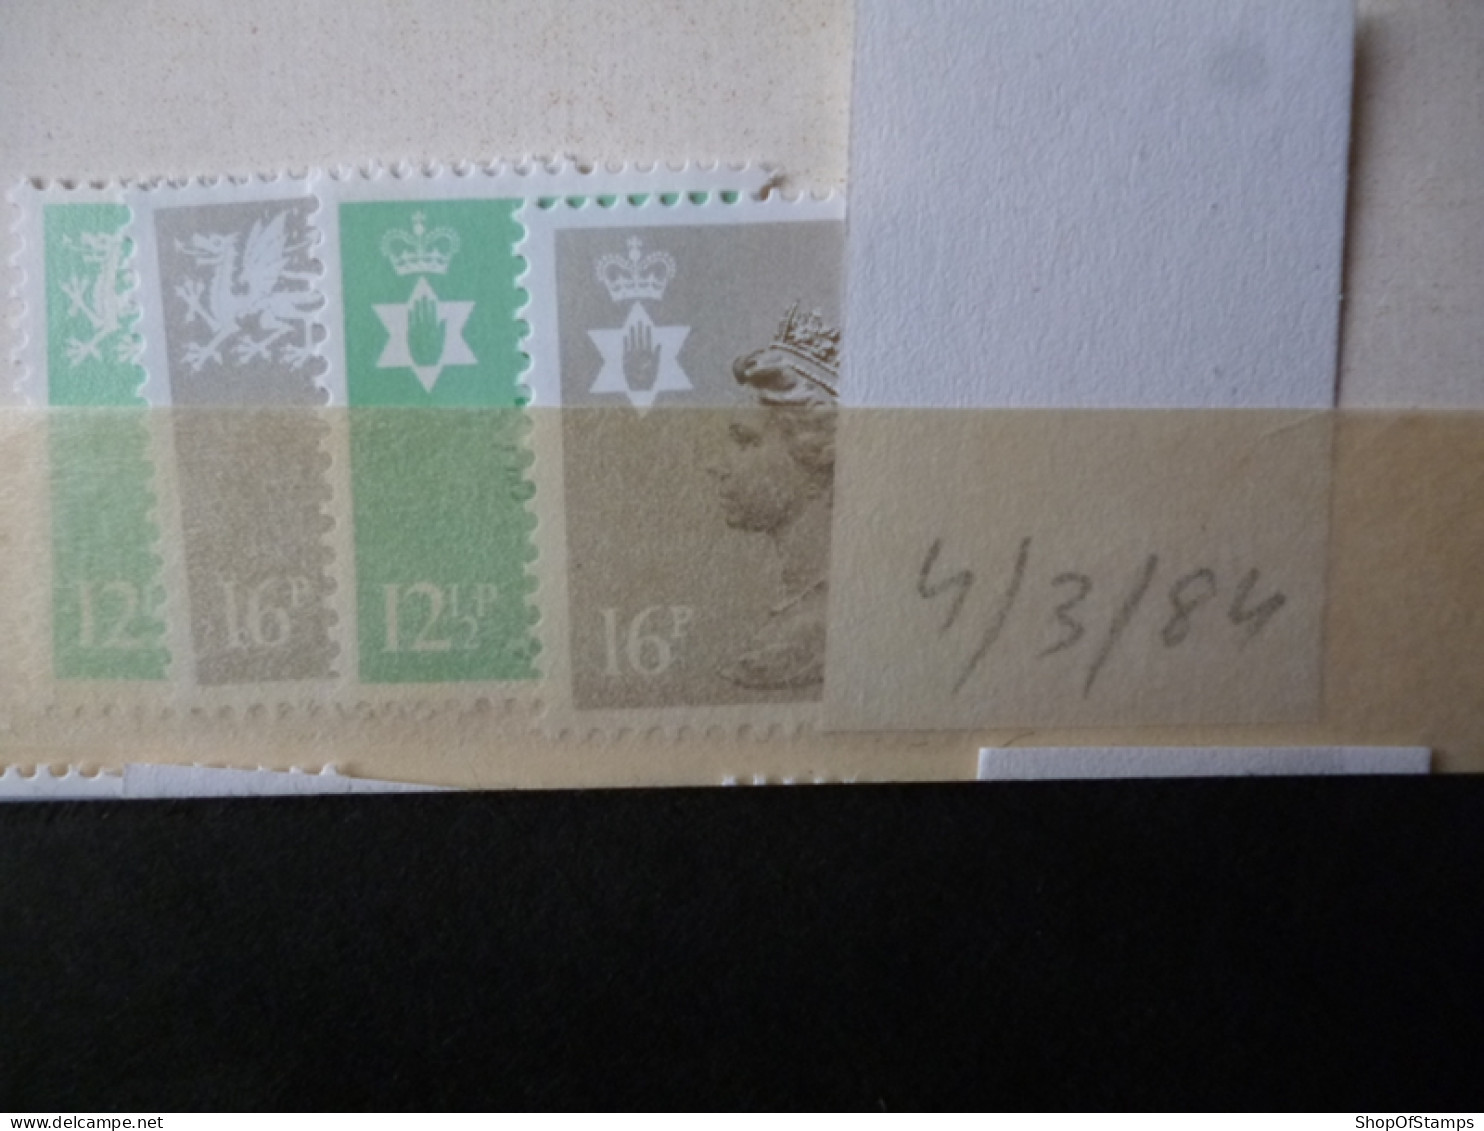 GREAT BRITAIN SG X 1984 28.2.84  MINT DEFI ISSUE FROM GPO IN ENVELOPE - Frankeermachines (EMA)